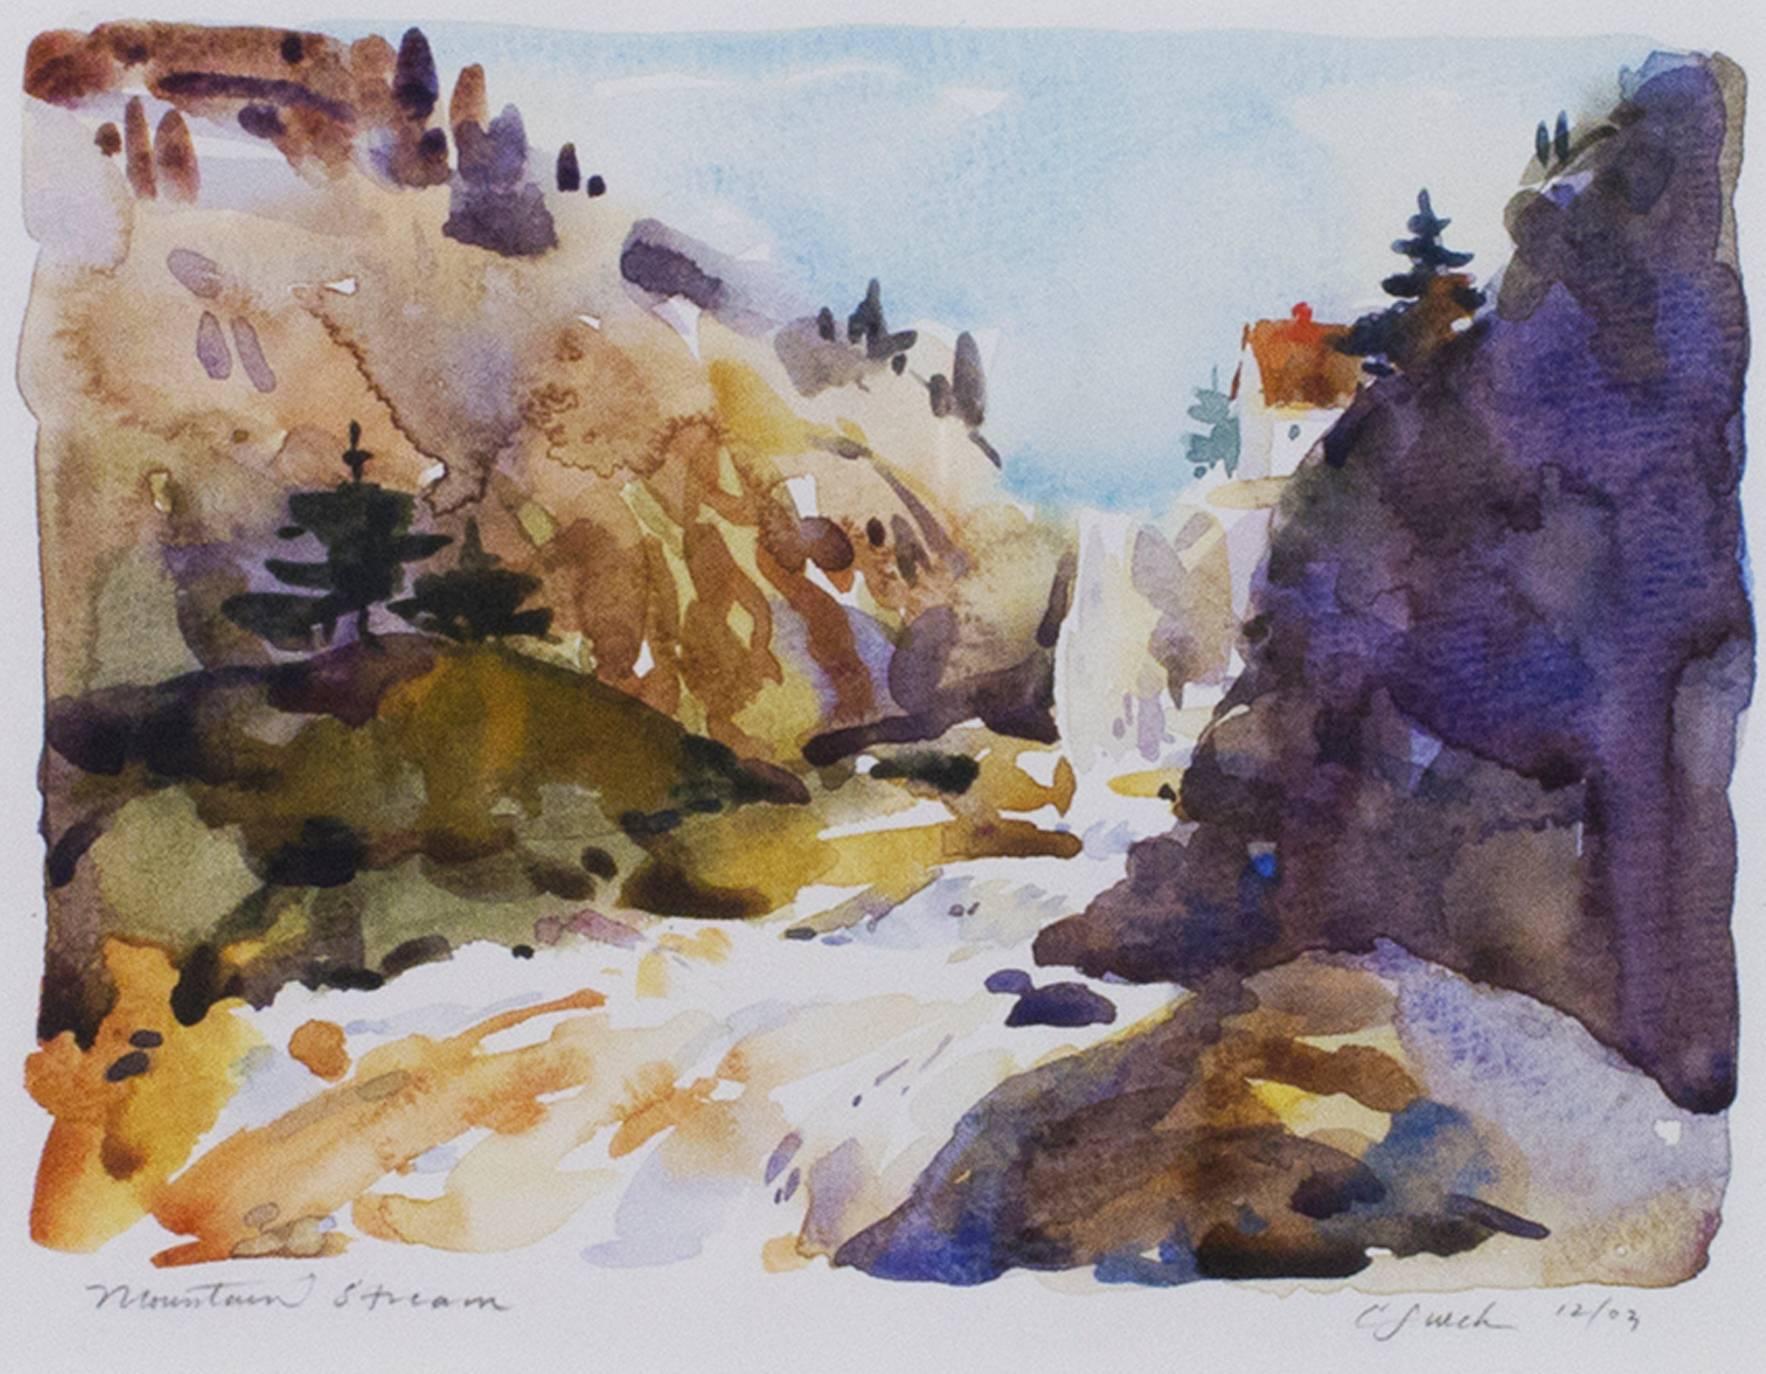 "Mountain Stream" is an original watercolor painting on Holbein watercolor paper by Craig Lueck. These petite watercolors that make up Lueck's portfolio serve as windows into the artist's world. Scenery from his travels to Colorado and Italy are